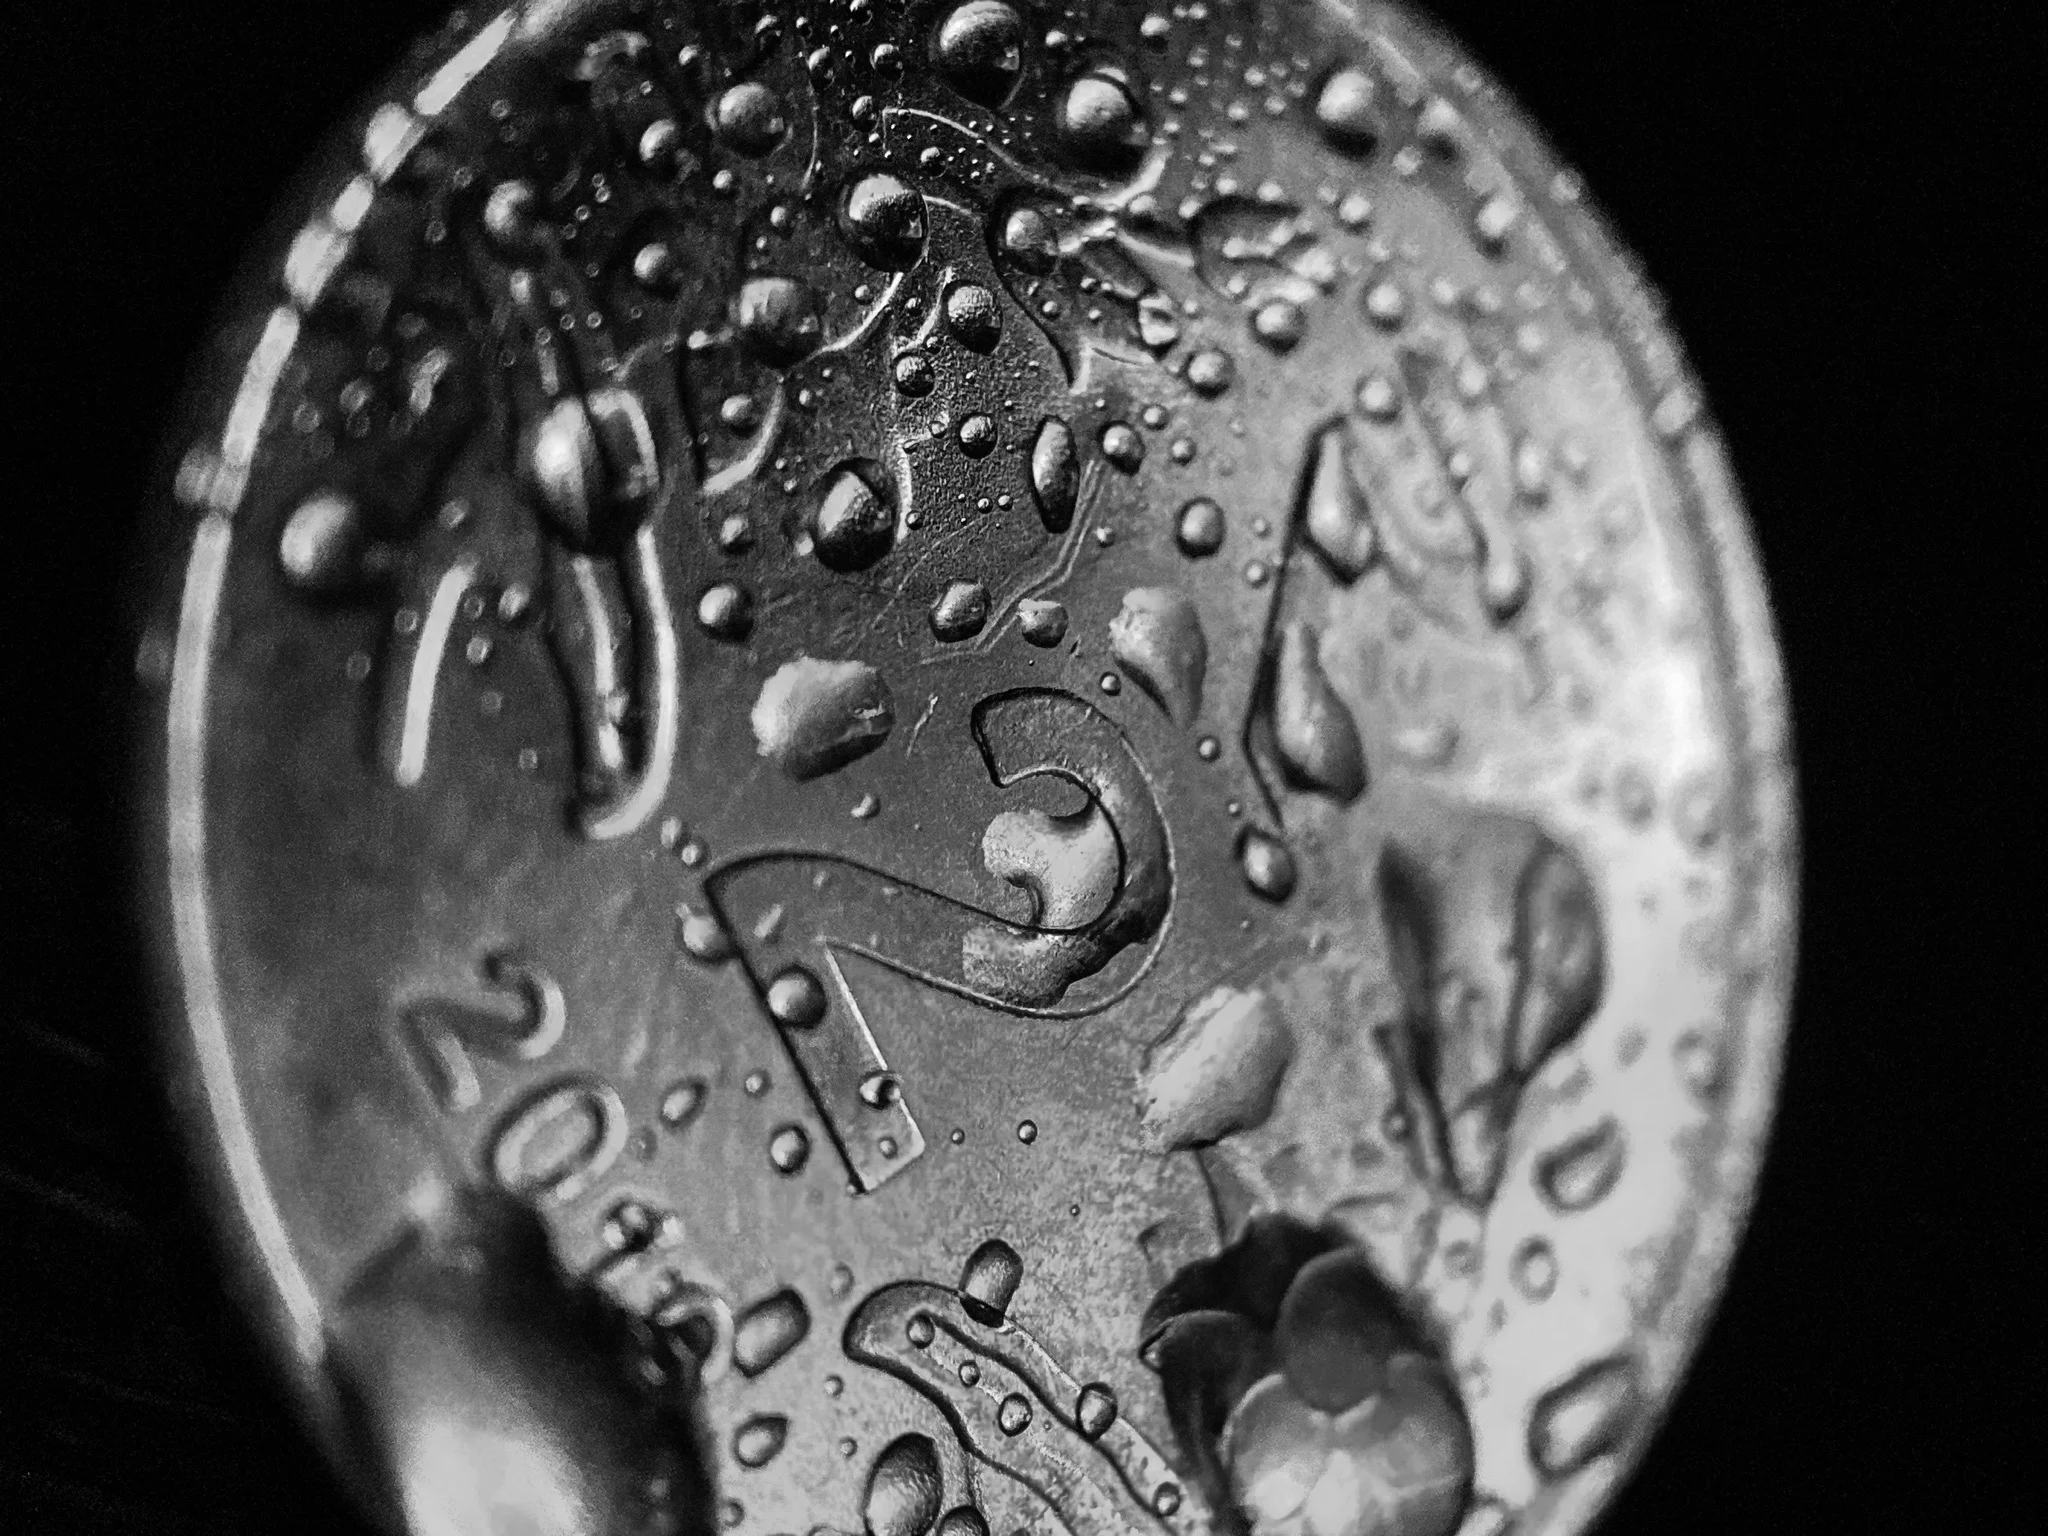 Indian 2-Rupee coin splashed with water